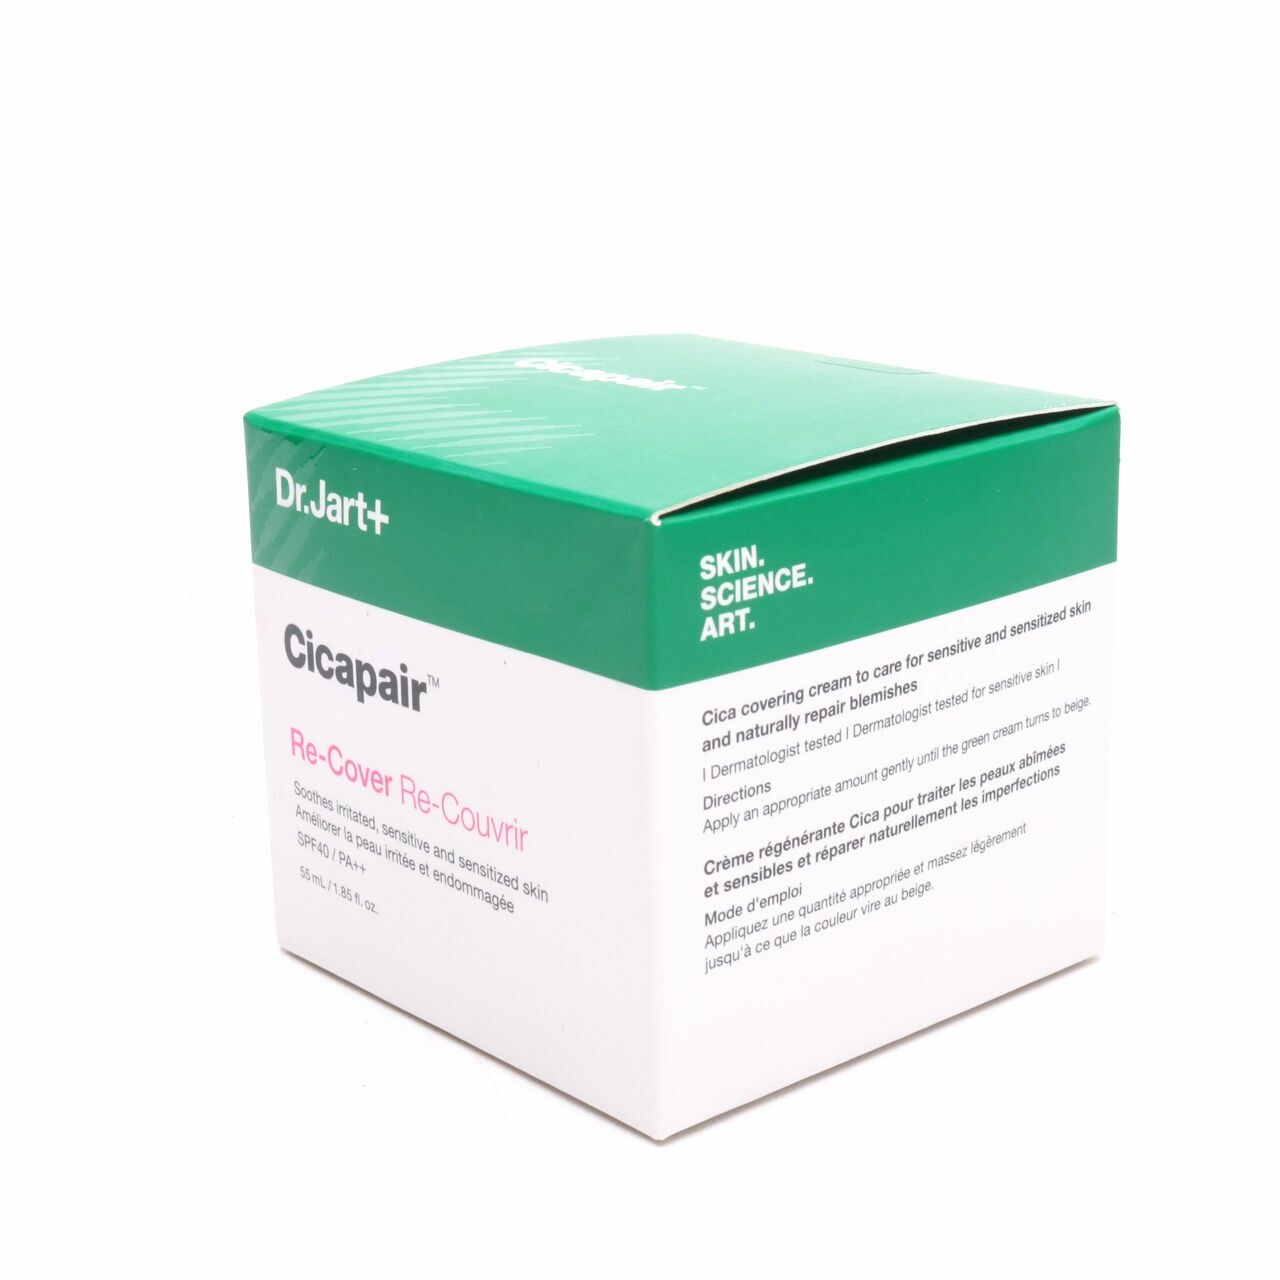 Dr.Jart+ Cicapair Re-Cover Re-Couvrir Skin Care